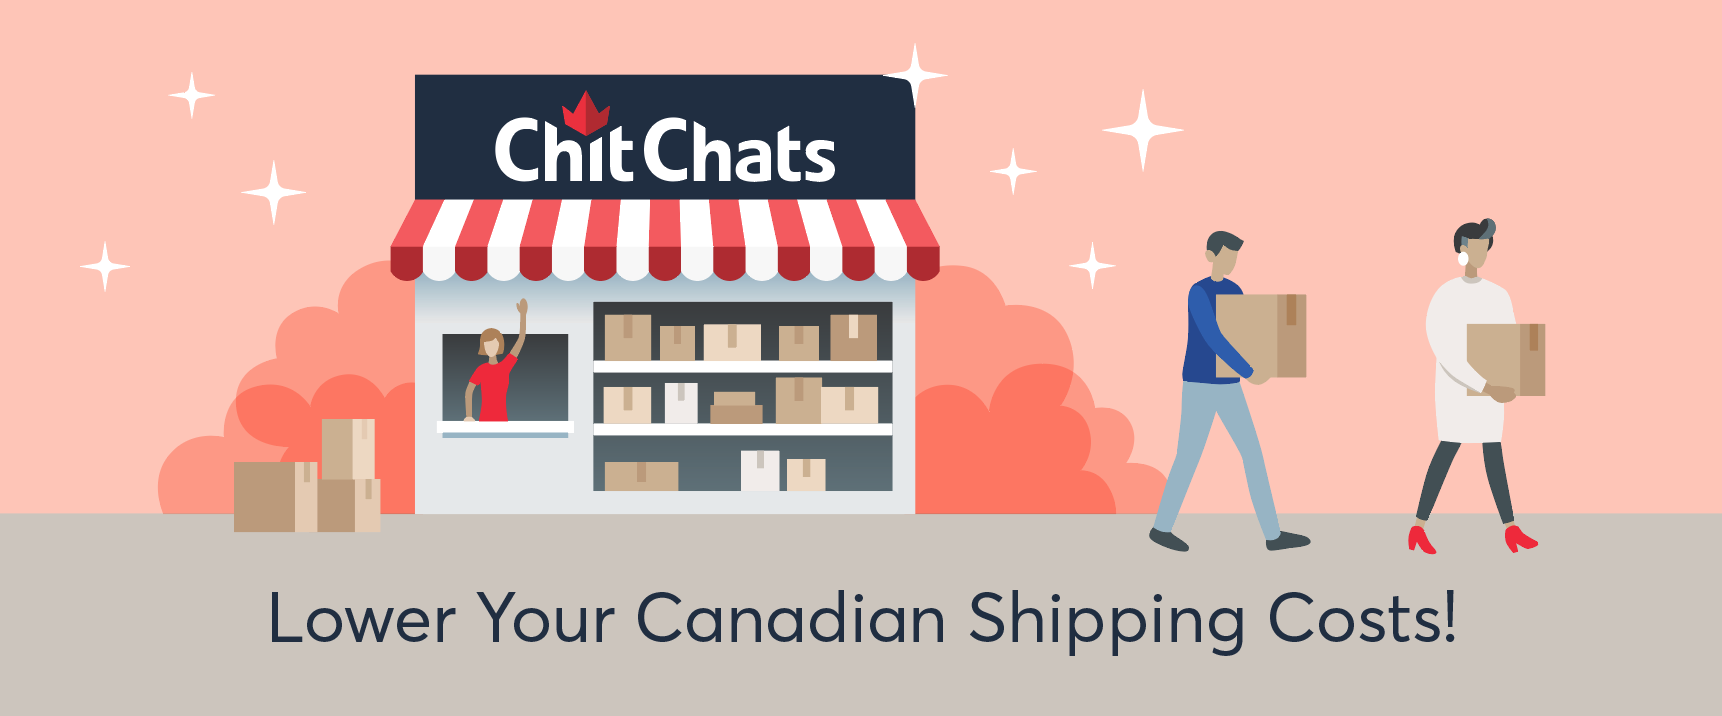 Canada Post Discontinues Low Cost Shipping Options, by Chit Chats, ChitChats